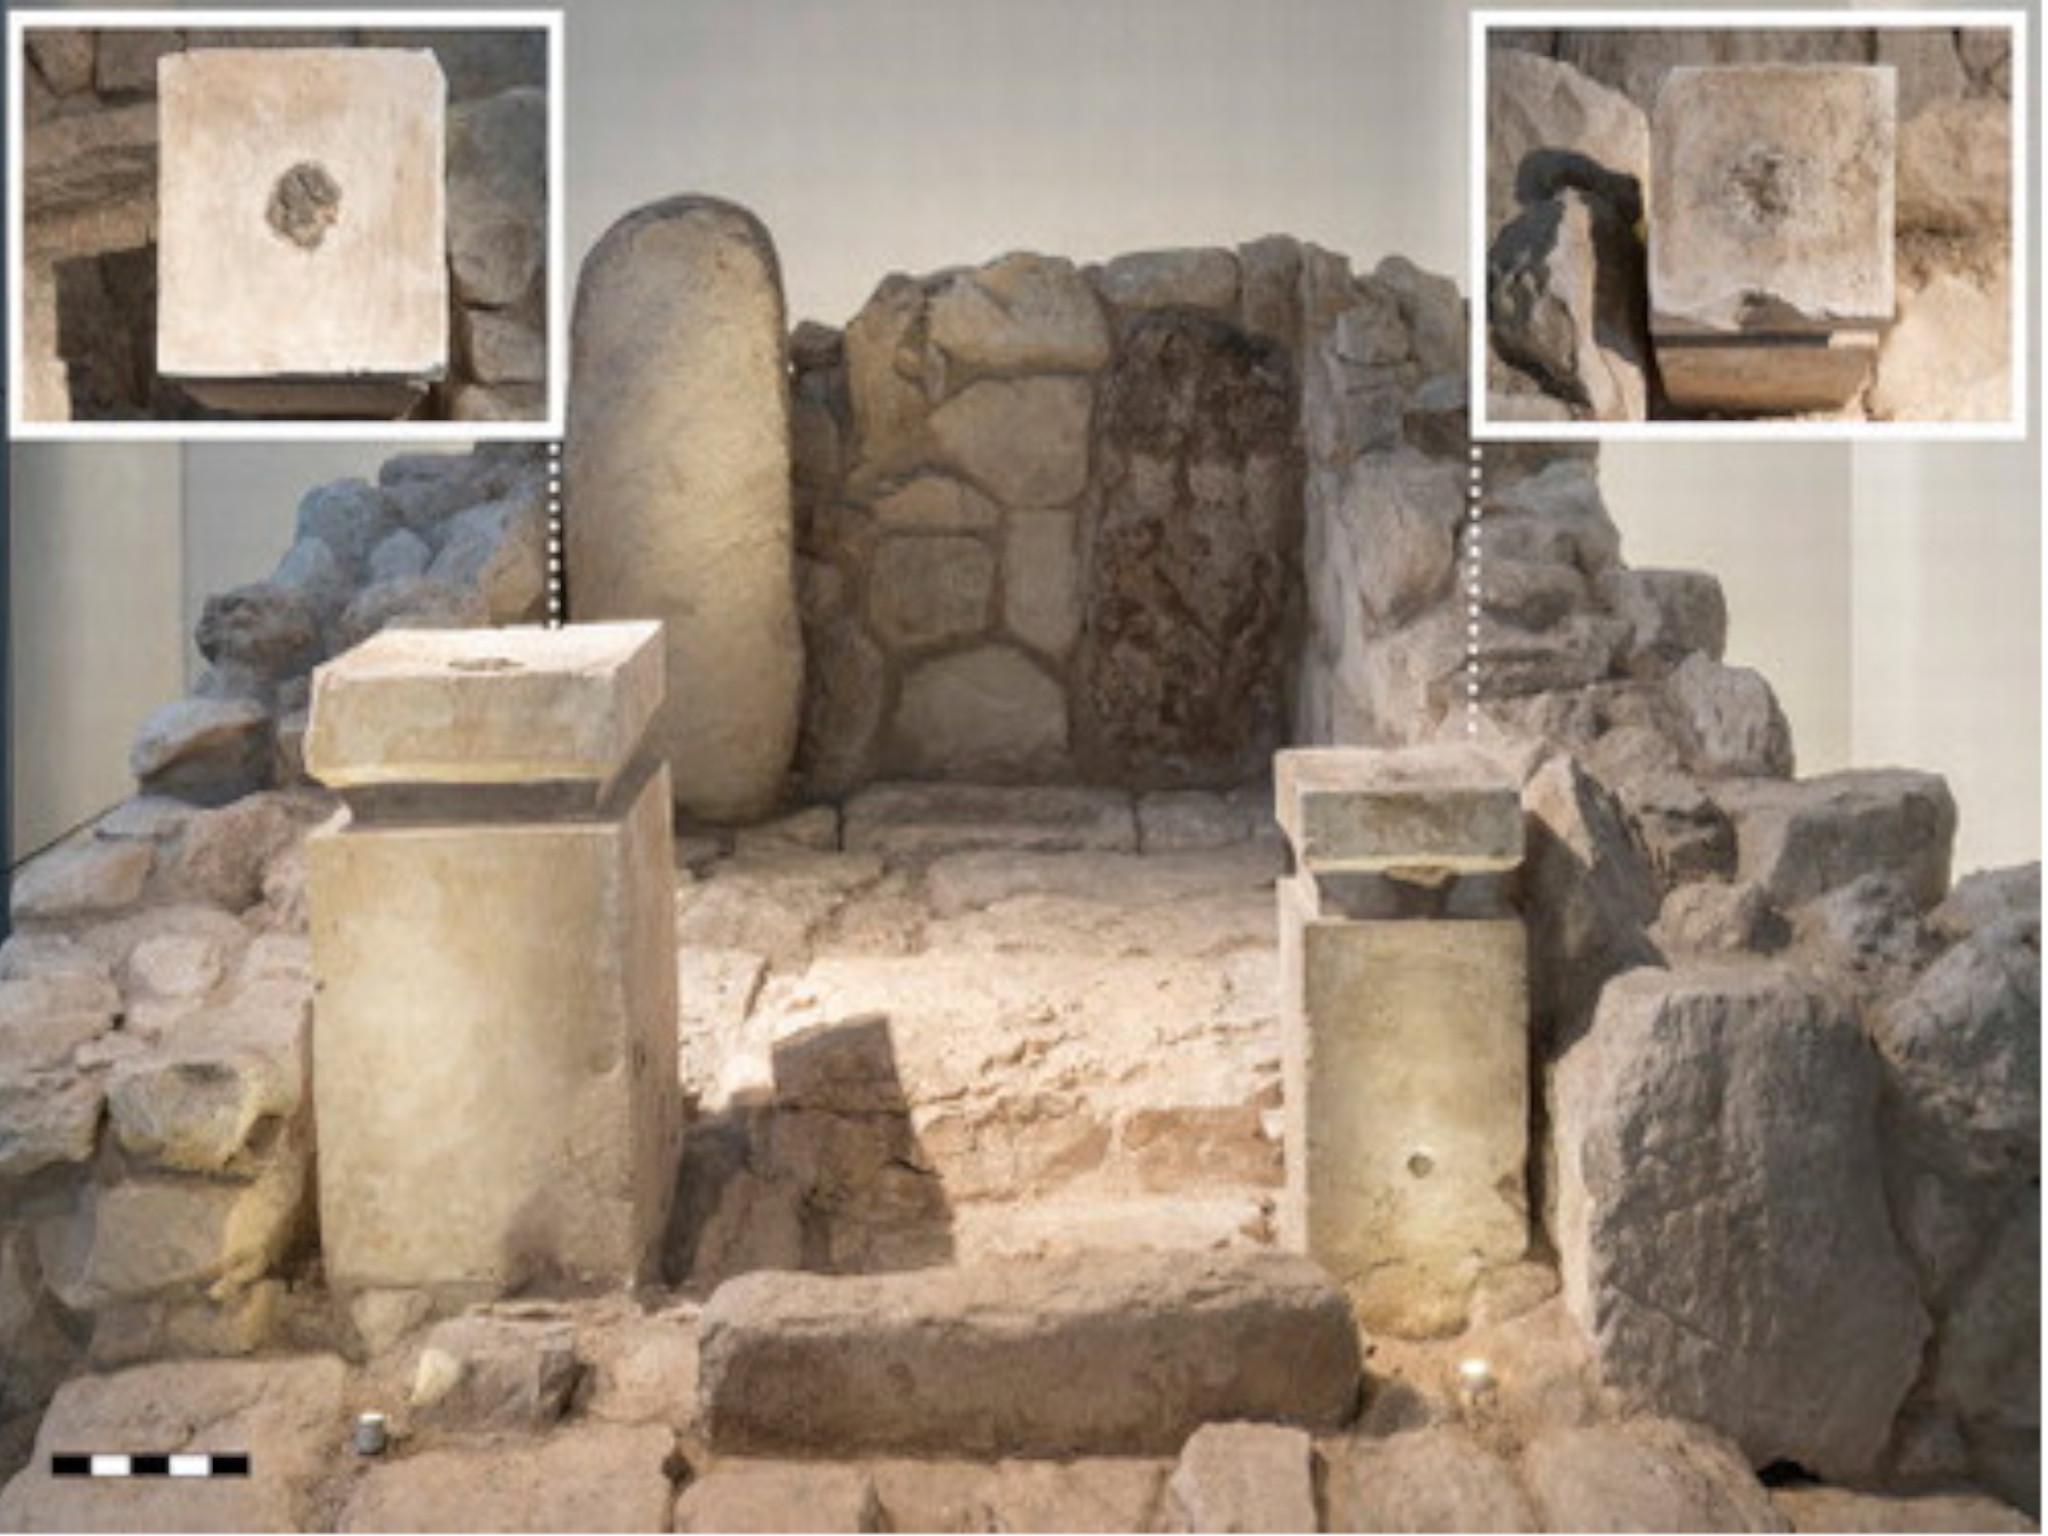 Frontal view of the cella of the shrine at Arad, as rebuilt in the Israel Museum from the original archaeological finds. The inserts show a top−down view of the altars: on the left, the larger altar; on the right, the smaller altar. Note the visible black residue